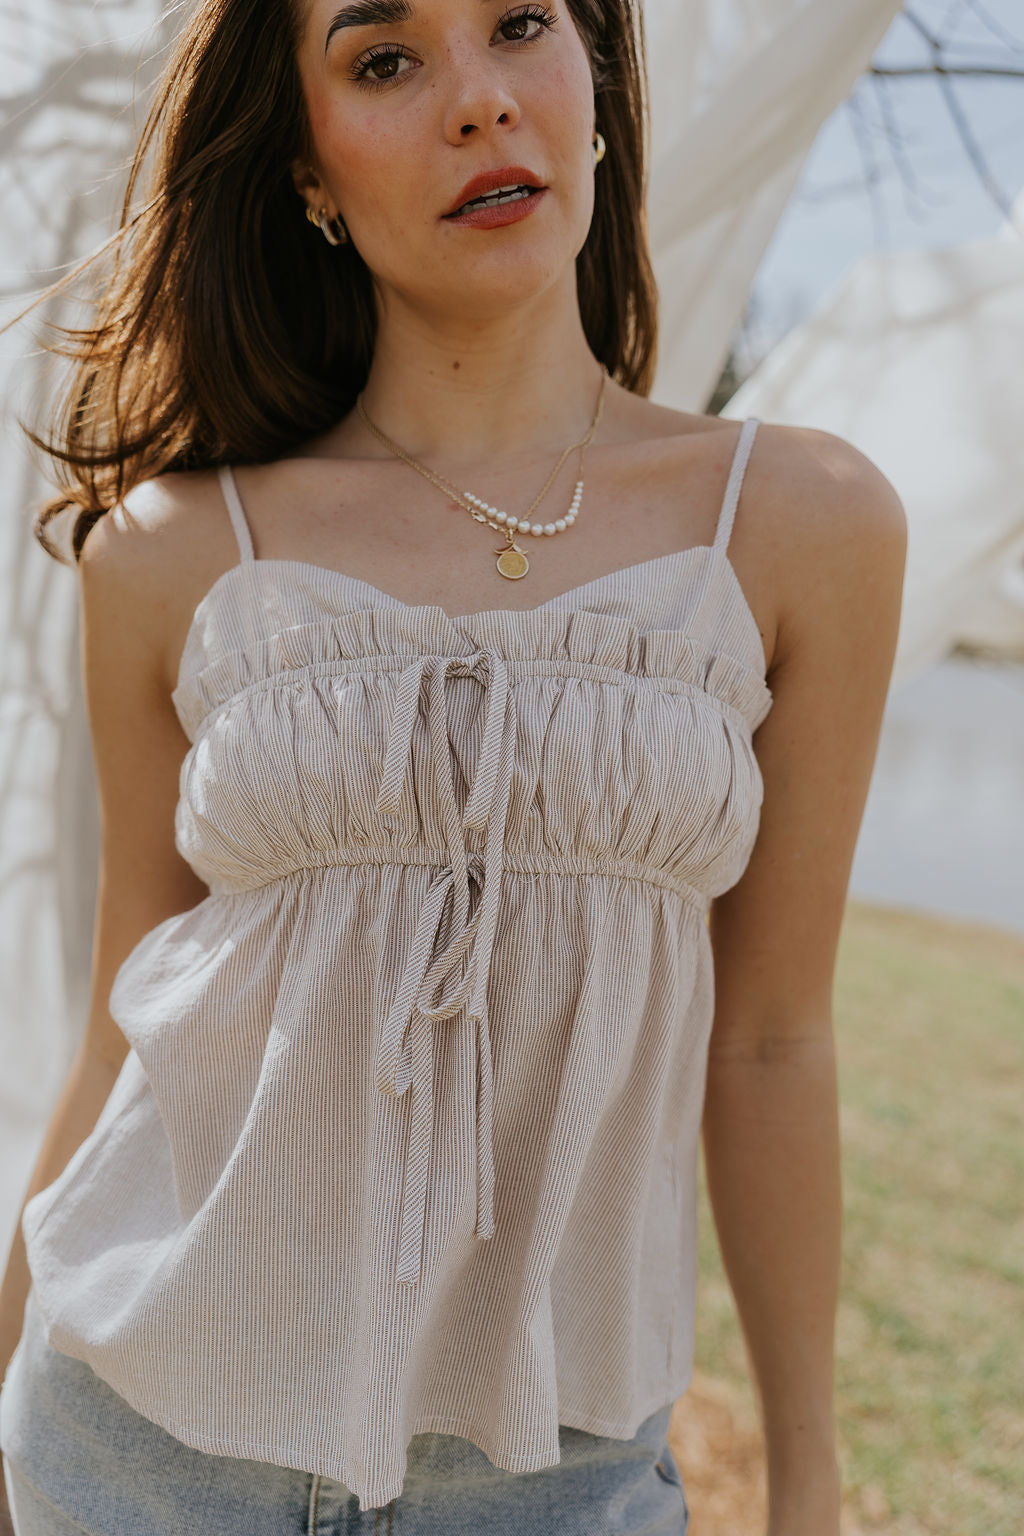 Close-up front view of female model wearing the Billie White & Taupe Striped Tank that has thin vertical stripes, front tie details, ruffle trim, and spaghetti straps